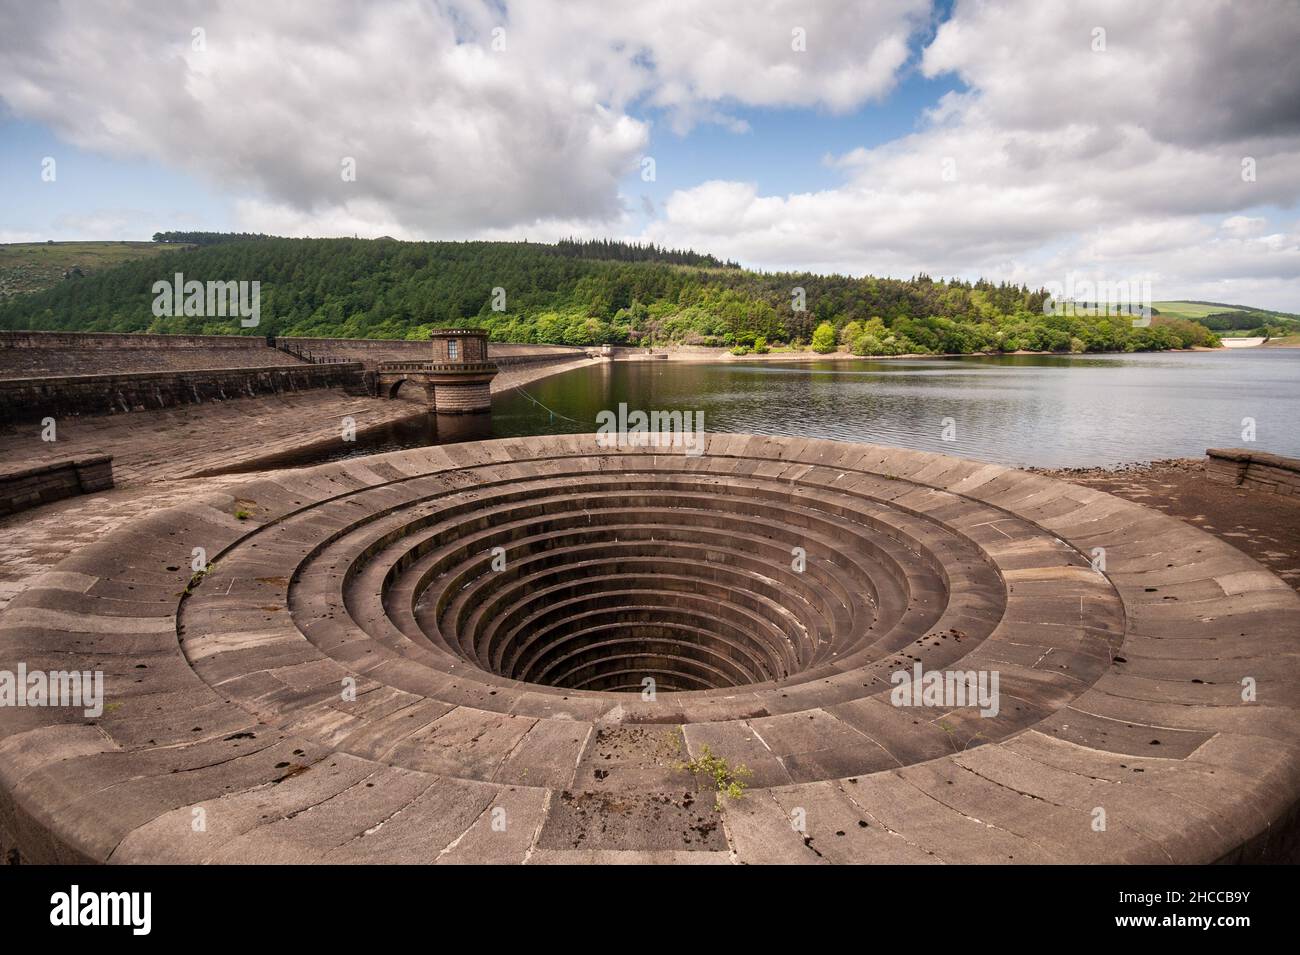 The stone dam and spillway of Ladybower Reservoir in the Derwent Valley, under the hills of Derbyshire's Peak District. Stock Photo